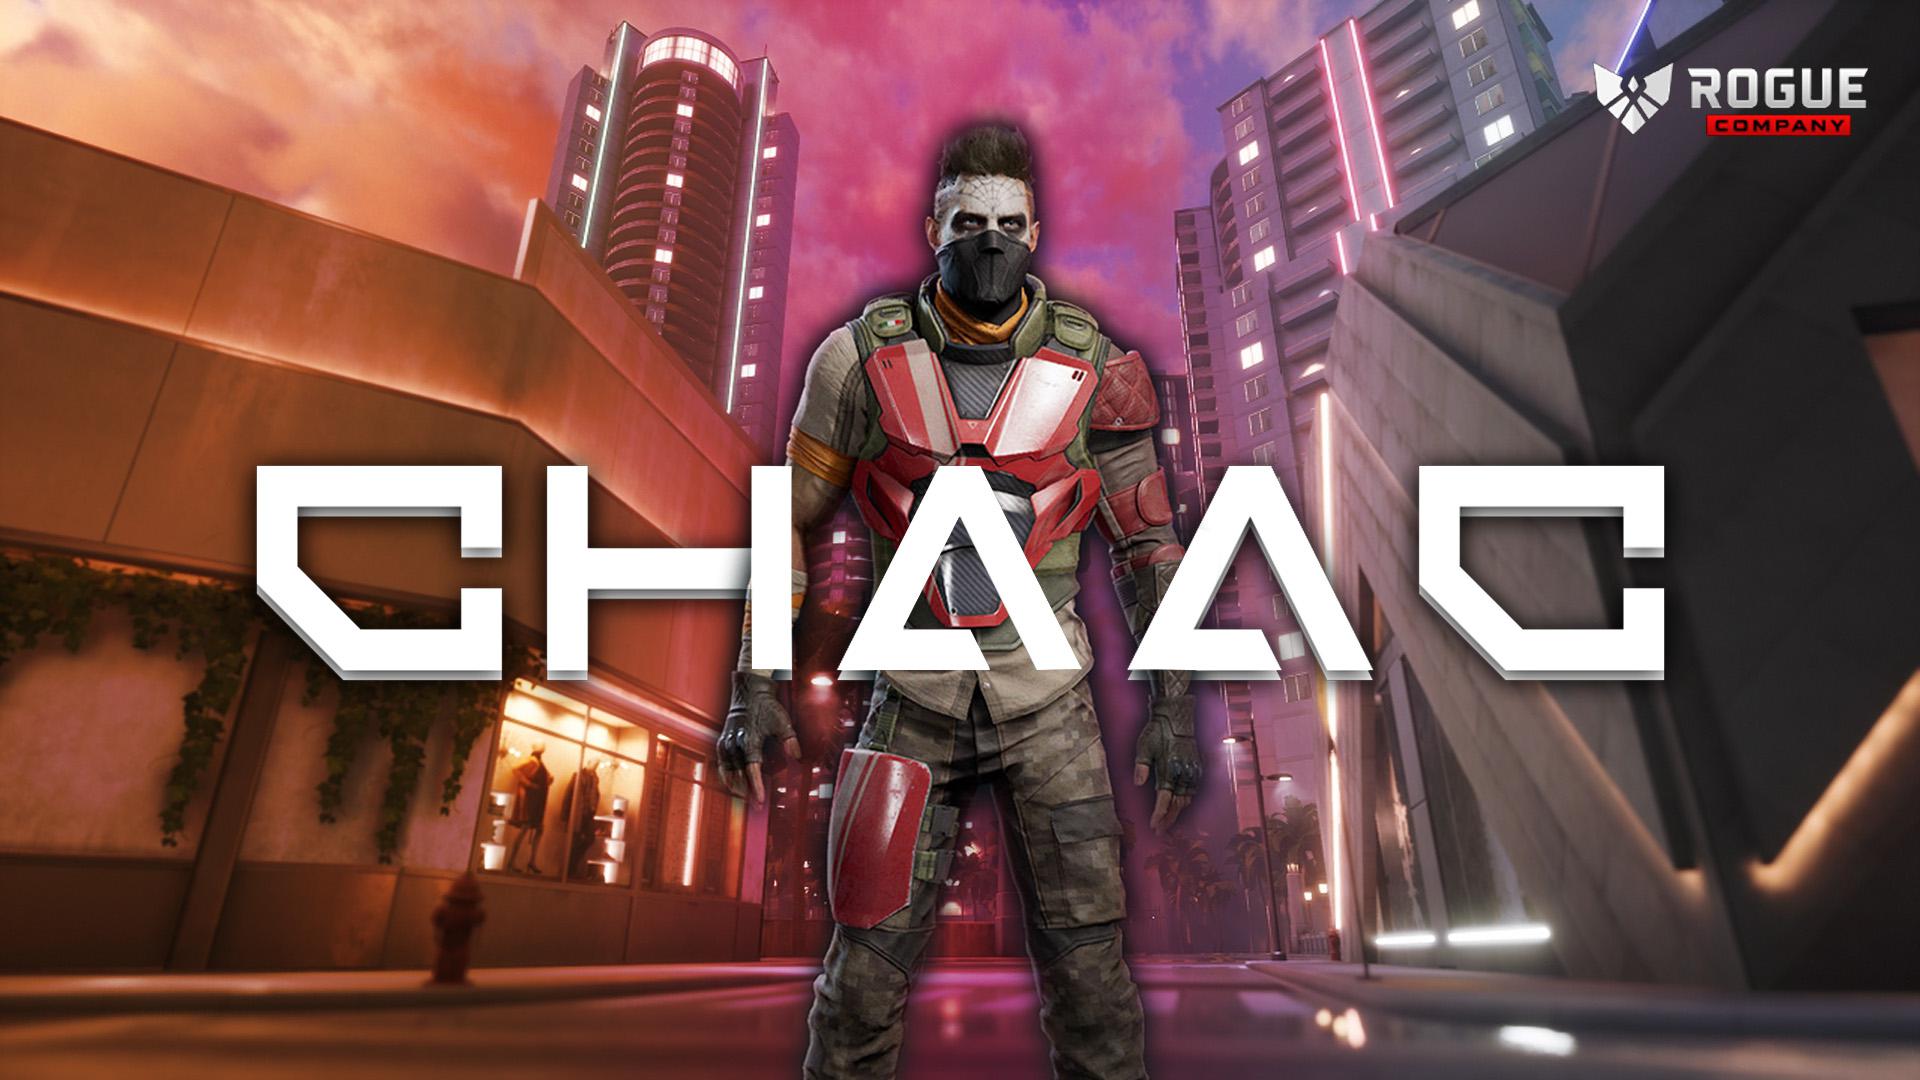 Wallpaper of CHAAC created by me!